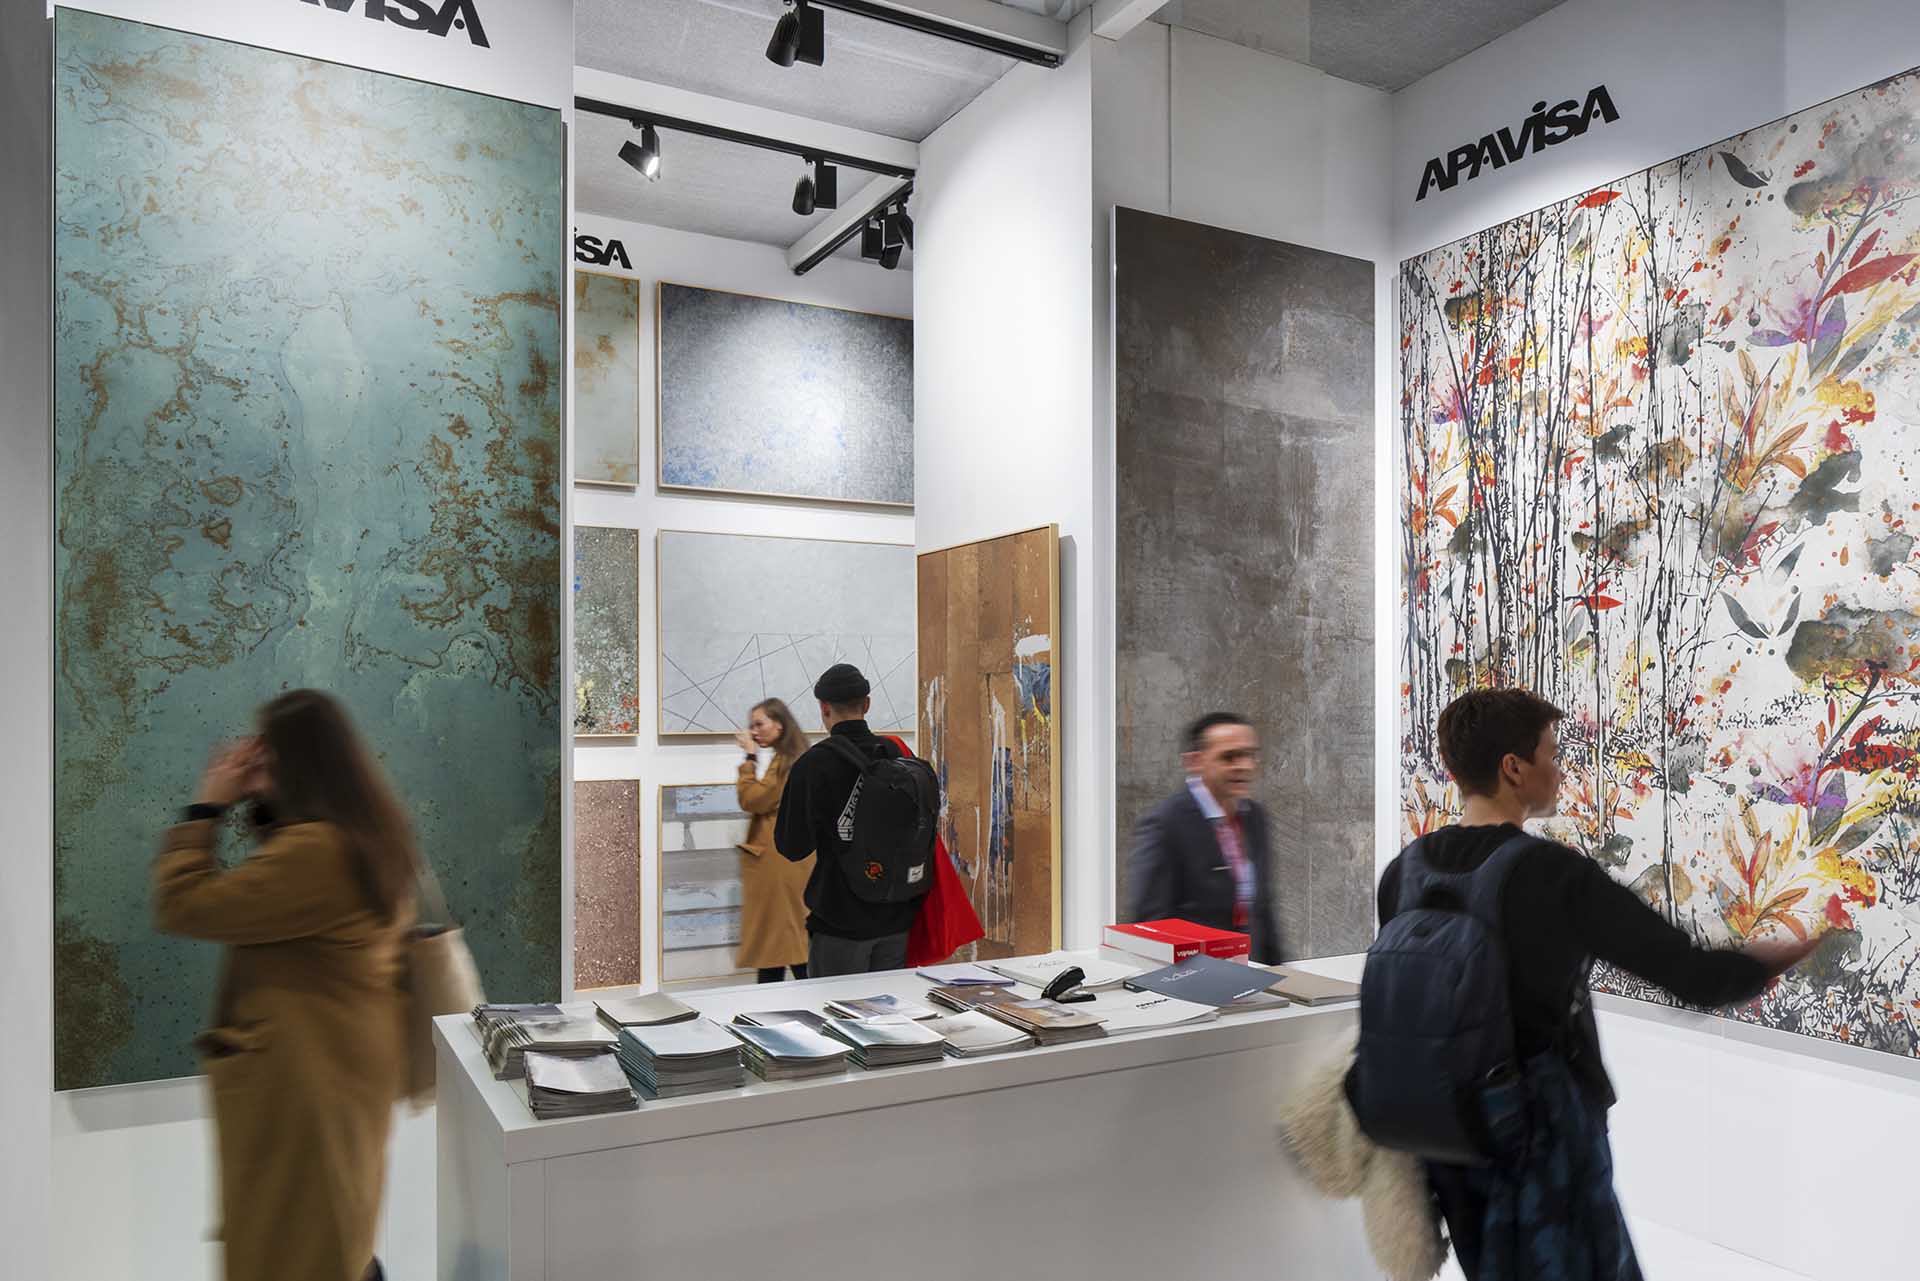 In January 2022, imm cologne will be the first major face-to-face event for the interiors industry to open its doors after the outbreak of the pandemic.